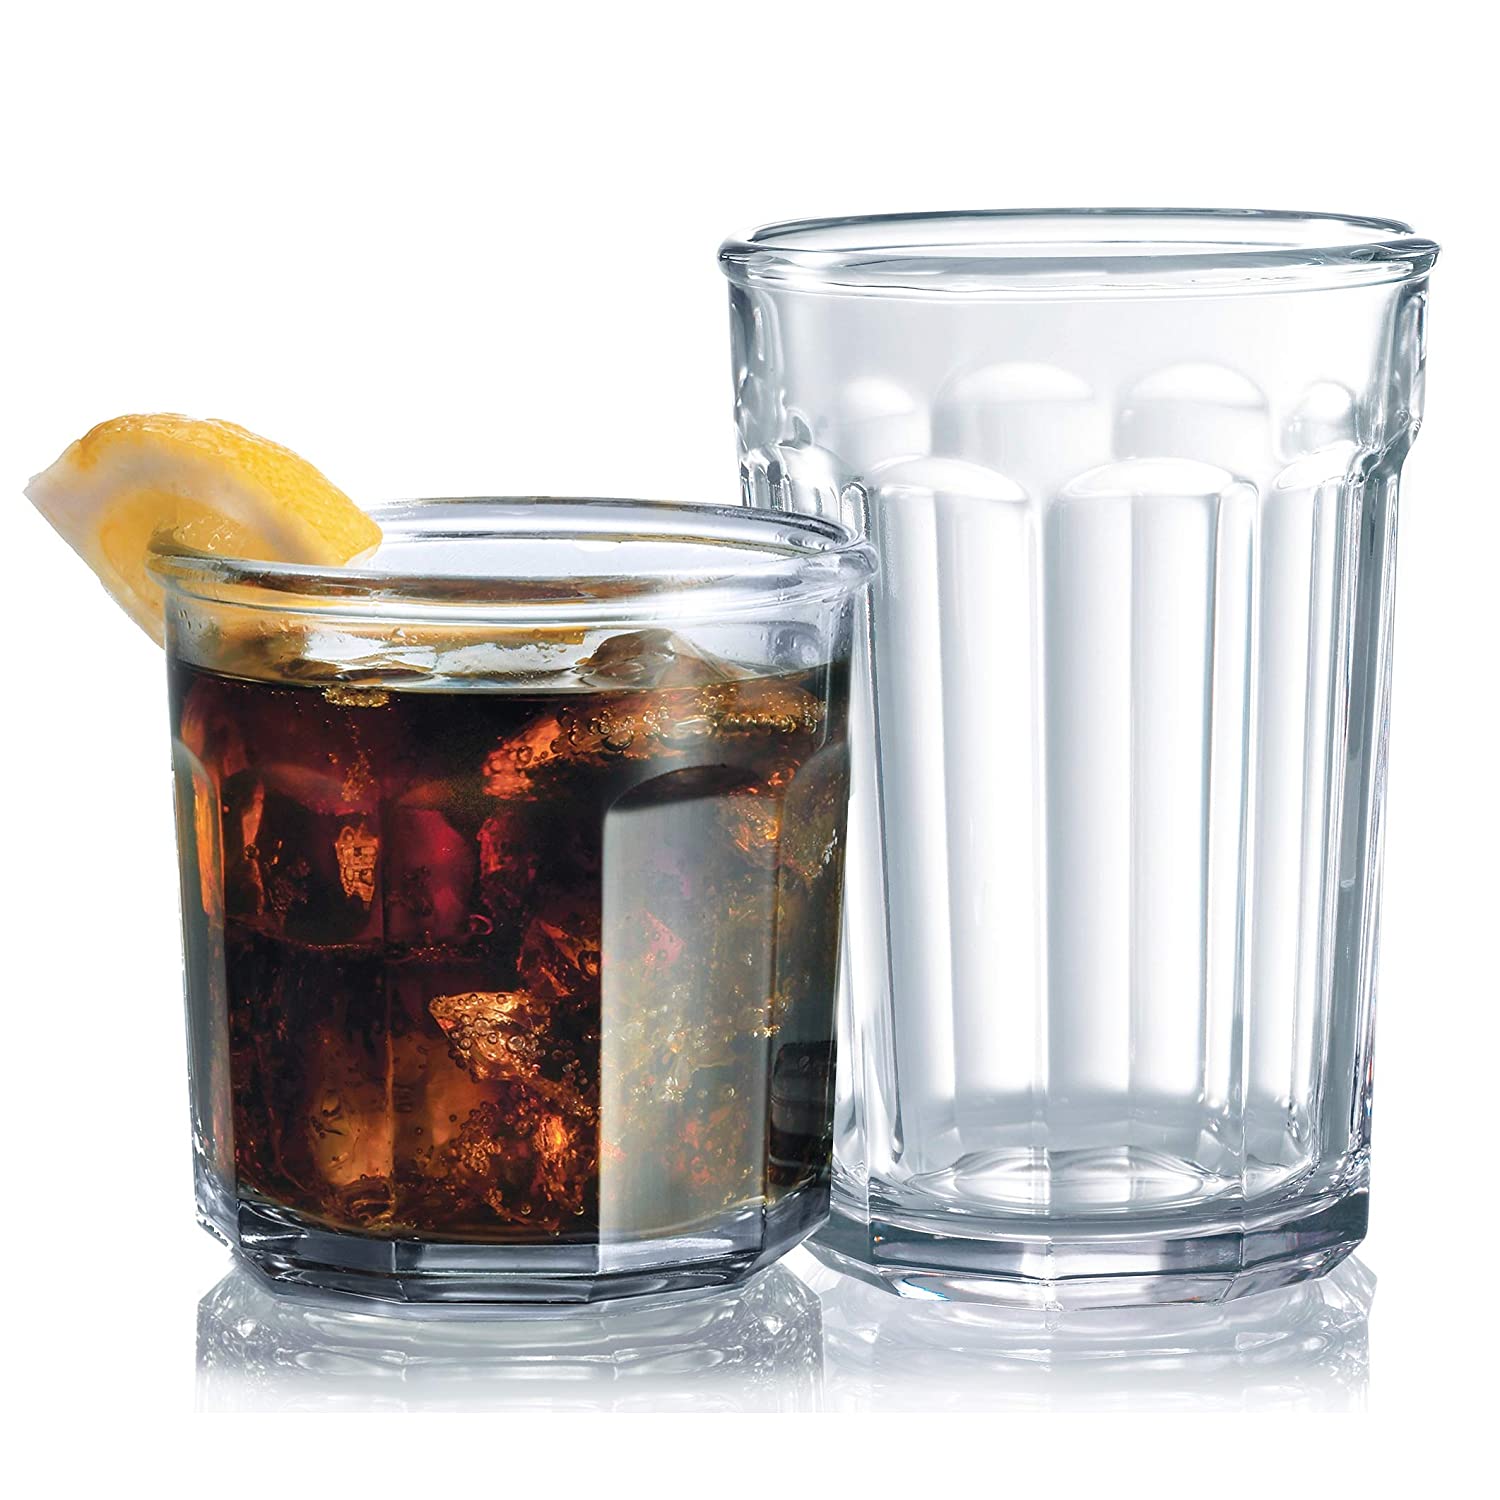 Glassware Set Includes 8-21 oz Highball Glasses 8-14 oz Tumbler Glasses Ideal for Water Set of 16 Durable Drinking Glasses Juice Beer Heavy Base Glass Cups Wine and Cocktails